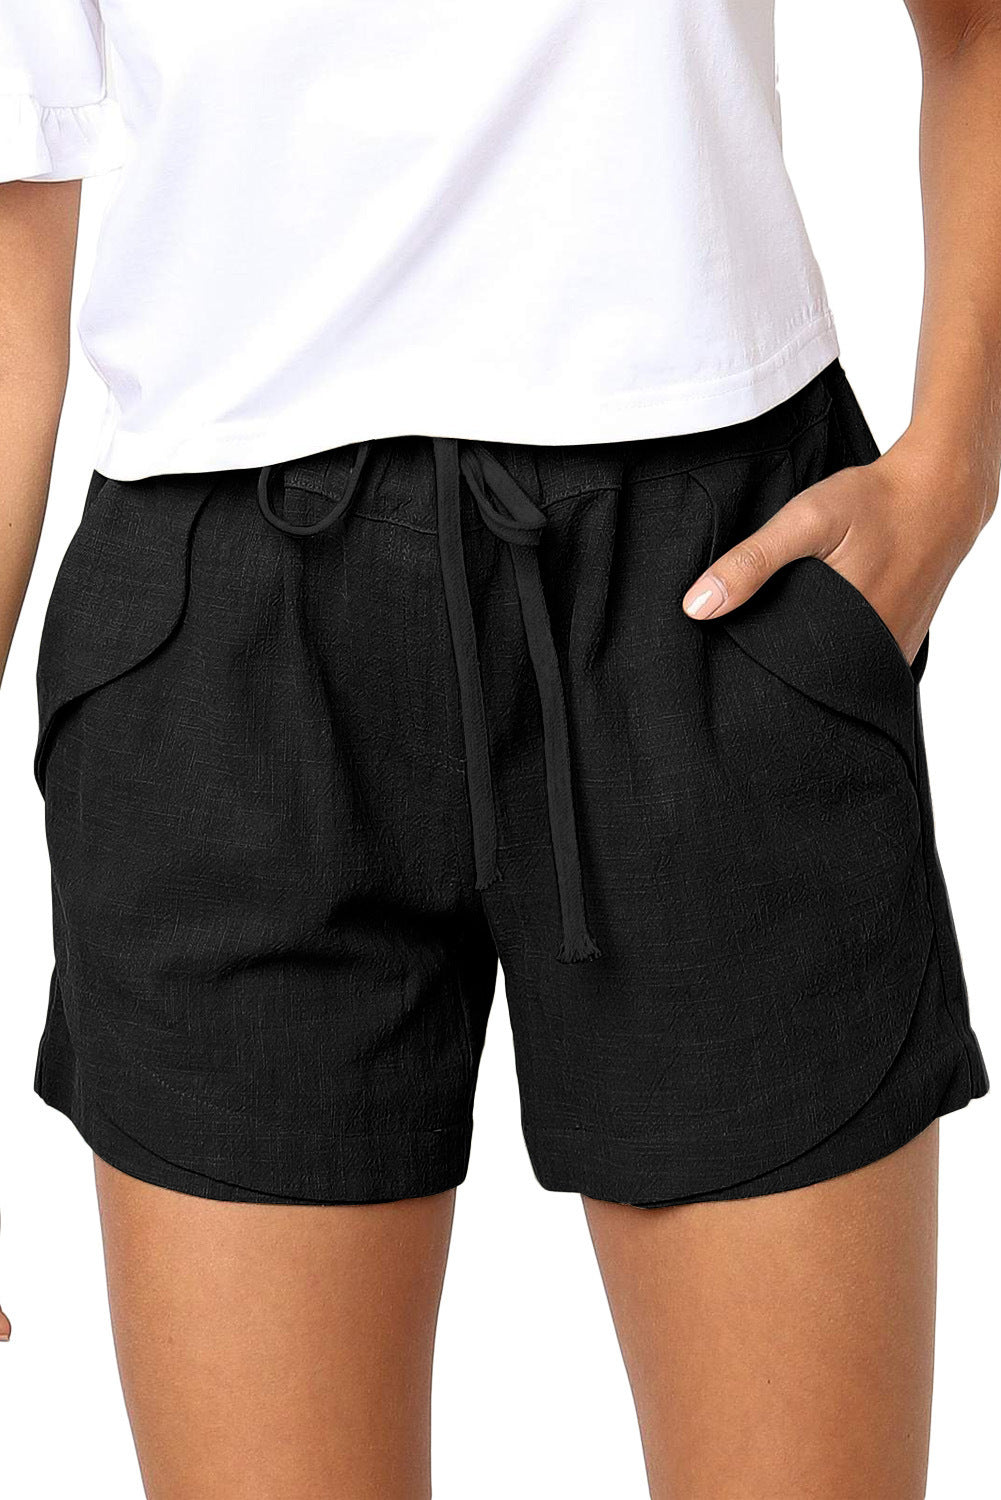 Women Clothing Short Summer Pleated Pocket A Line Stretch Lace Up High Waist Shorts